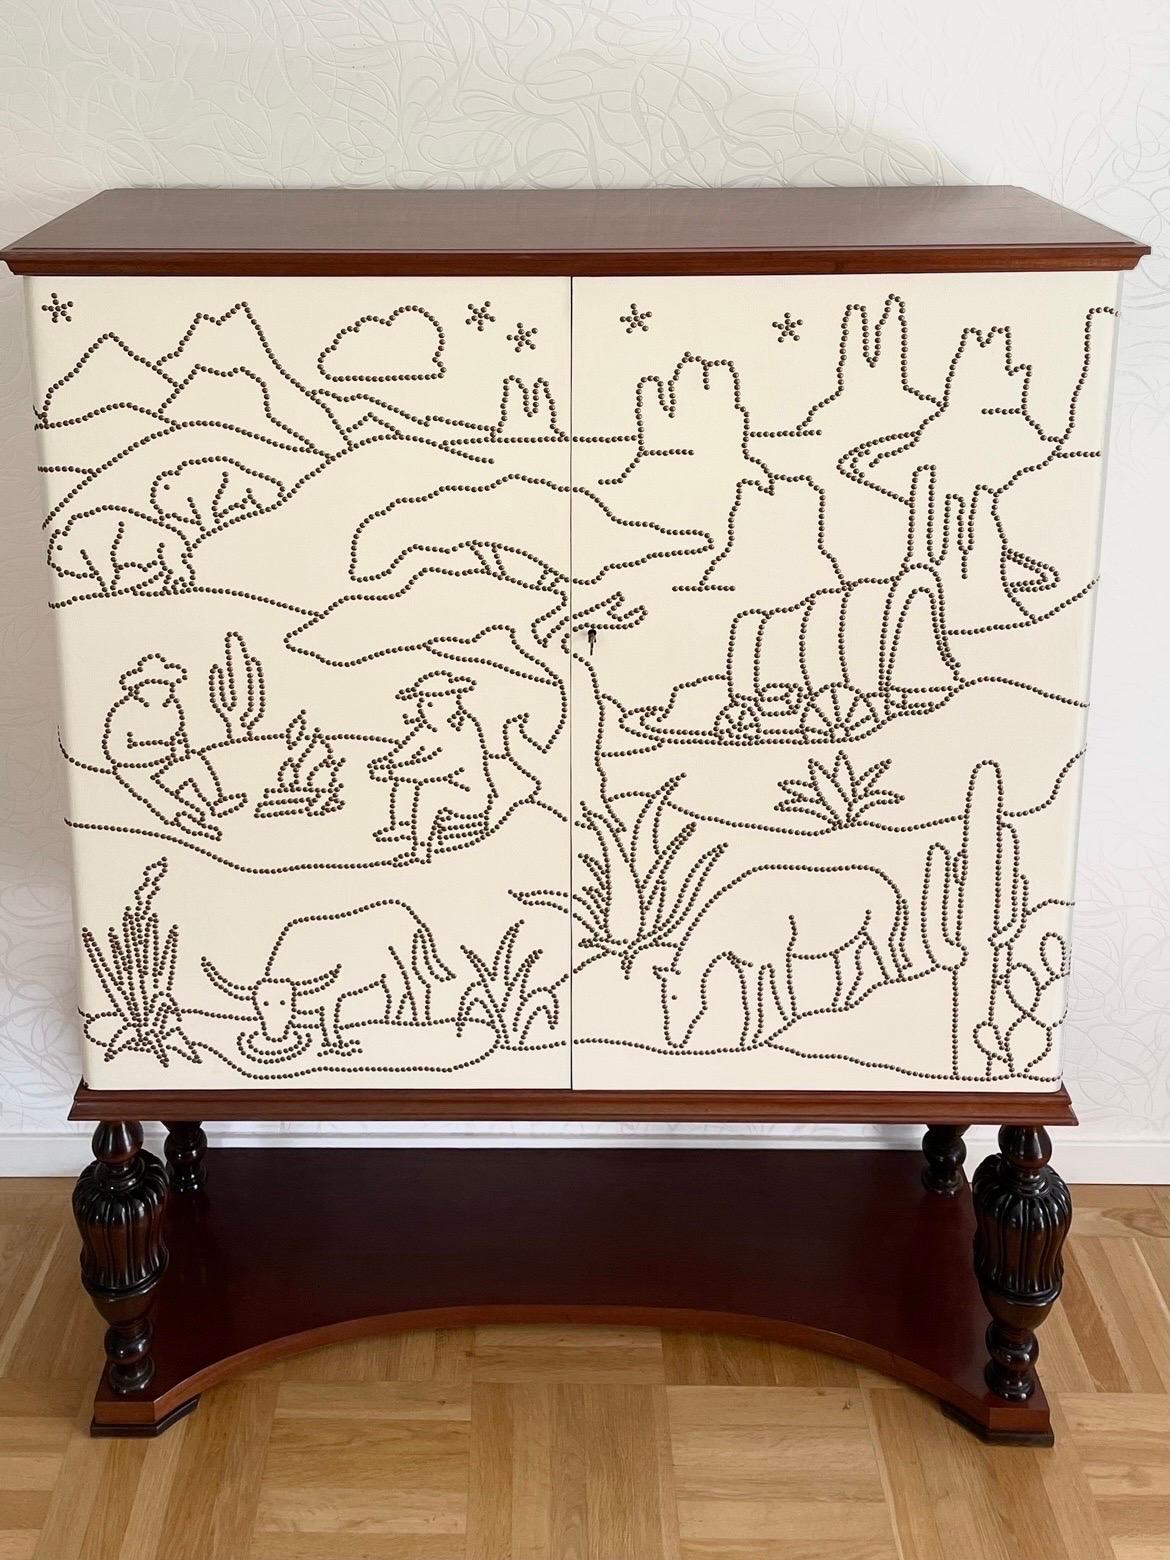 Swedish Modern 1930s Cabinet with newly designed pattern “The Emigrants” 1